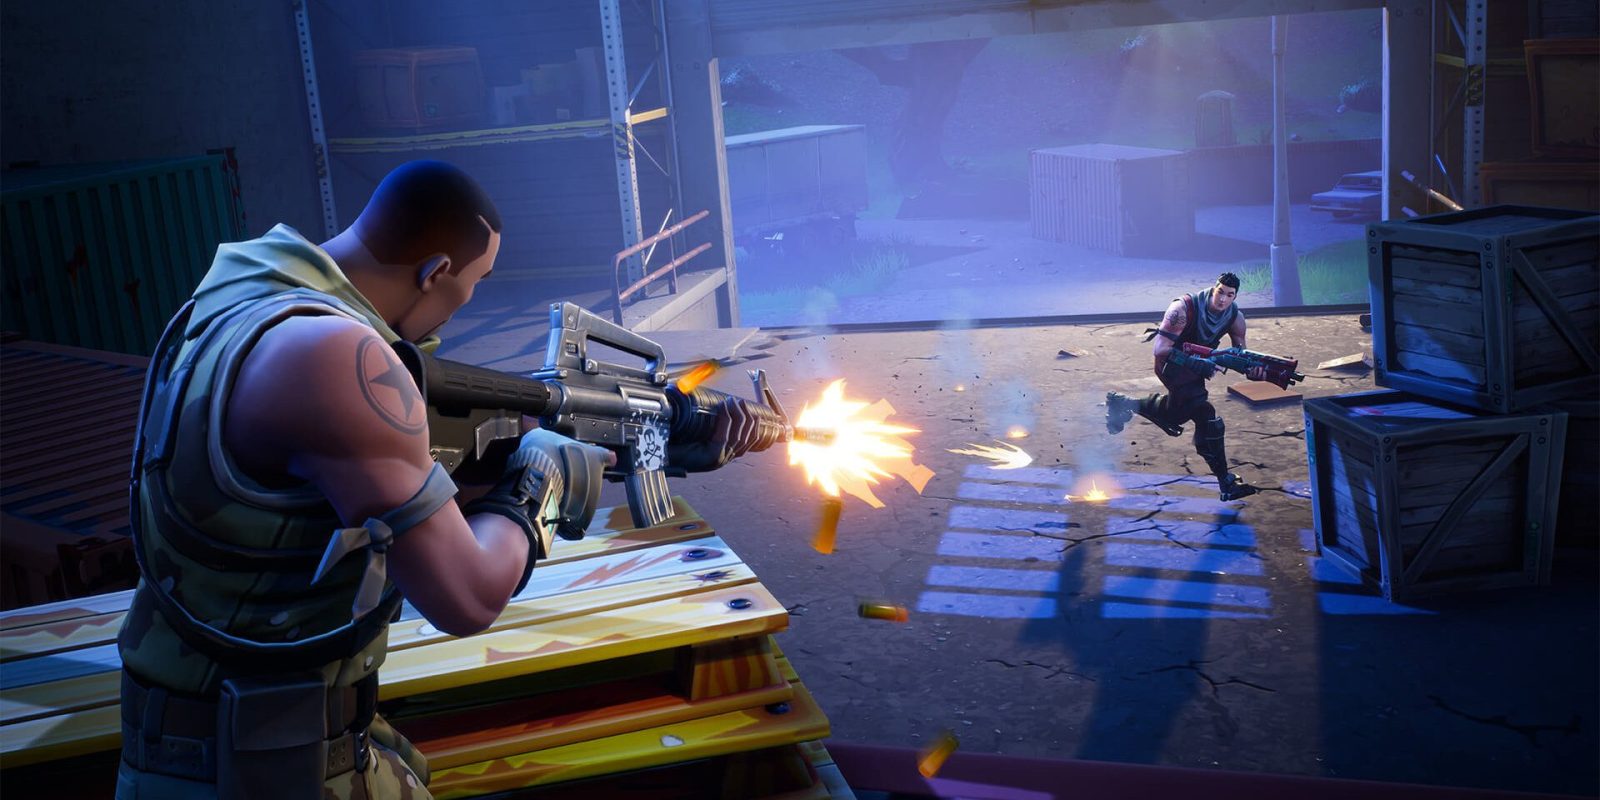 Fortnite For Ios Updated With Improved Joystick Support And 120